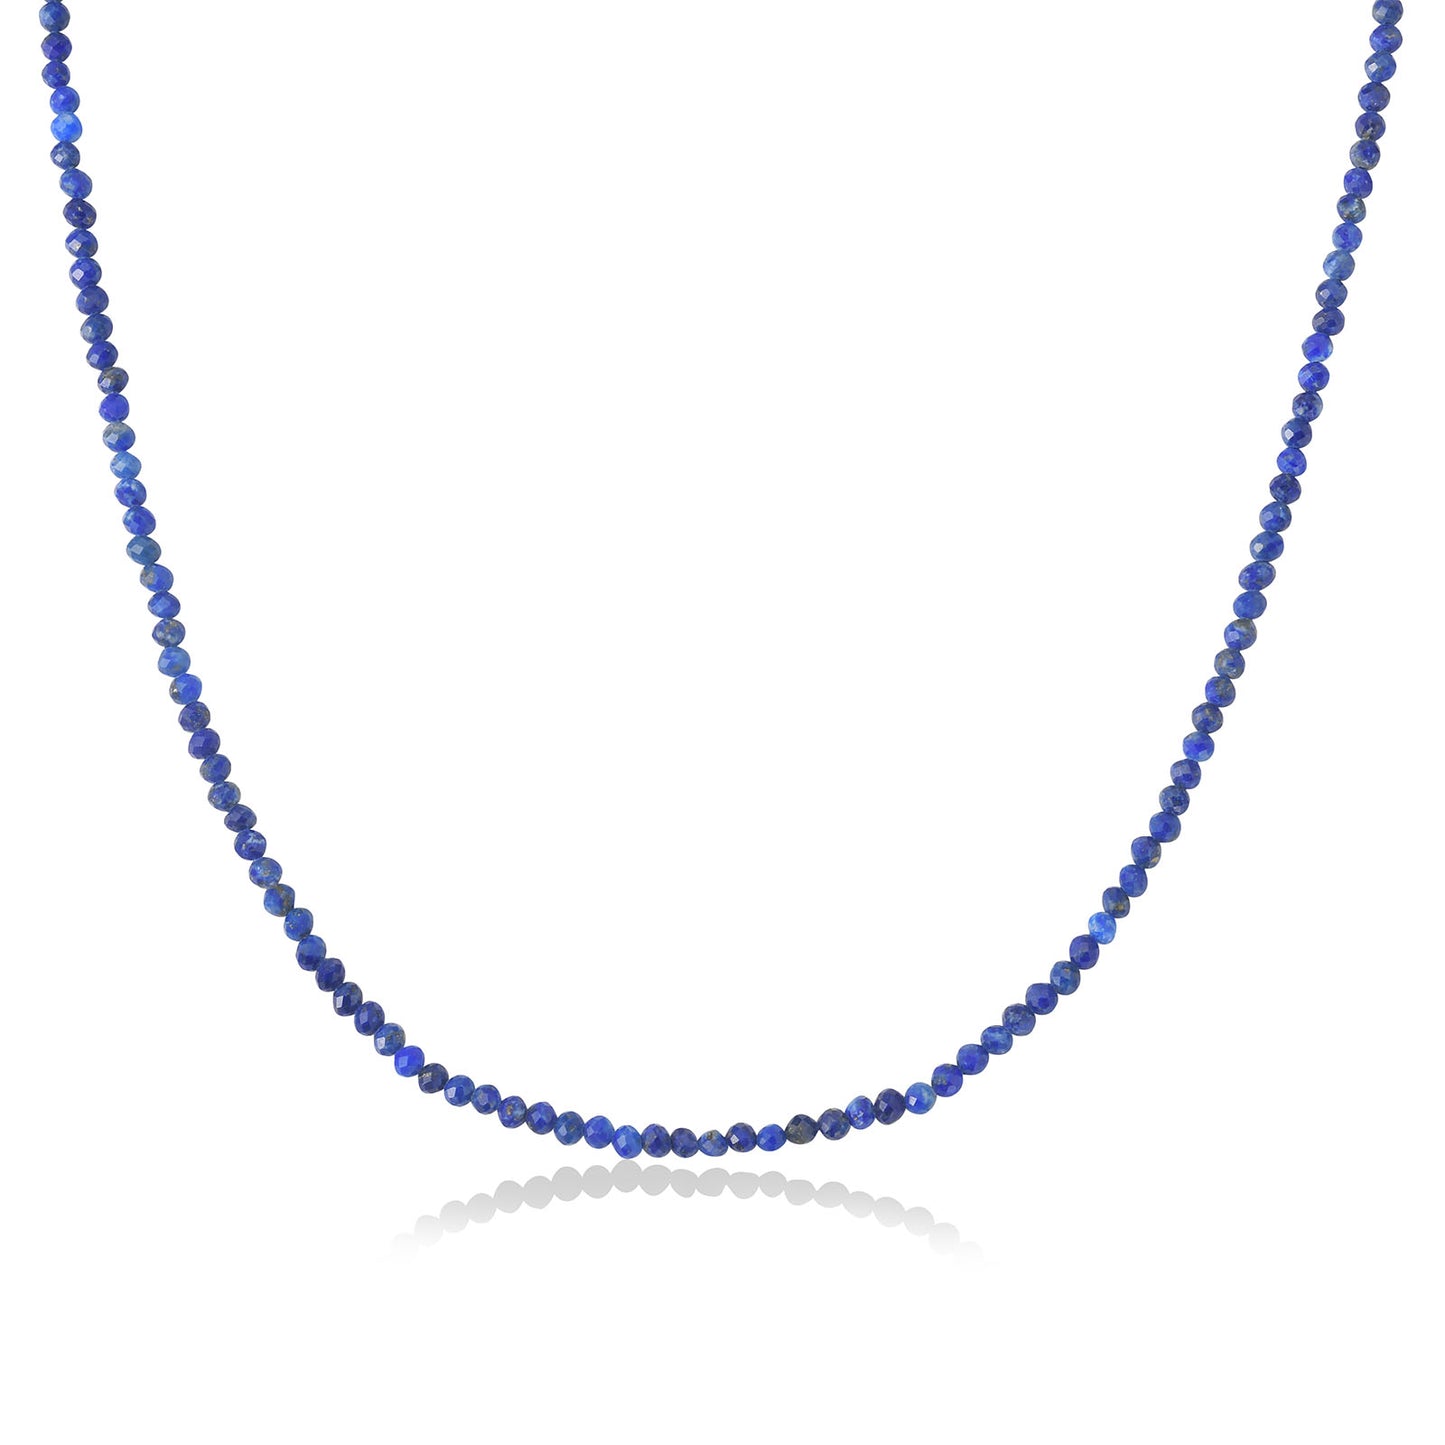 Shimmering beaded necklace made of 2mm faceted opals in shades of blue on a gold linking lobster clasp.